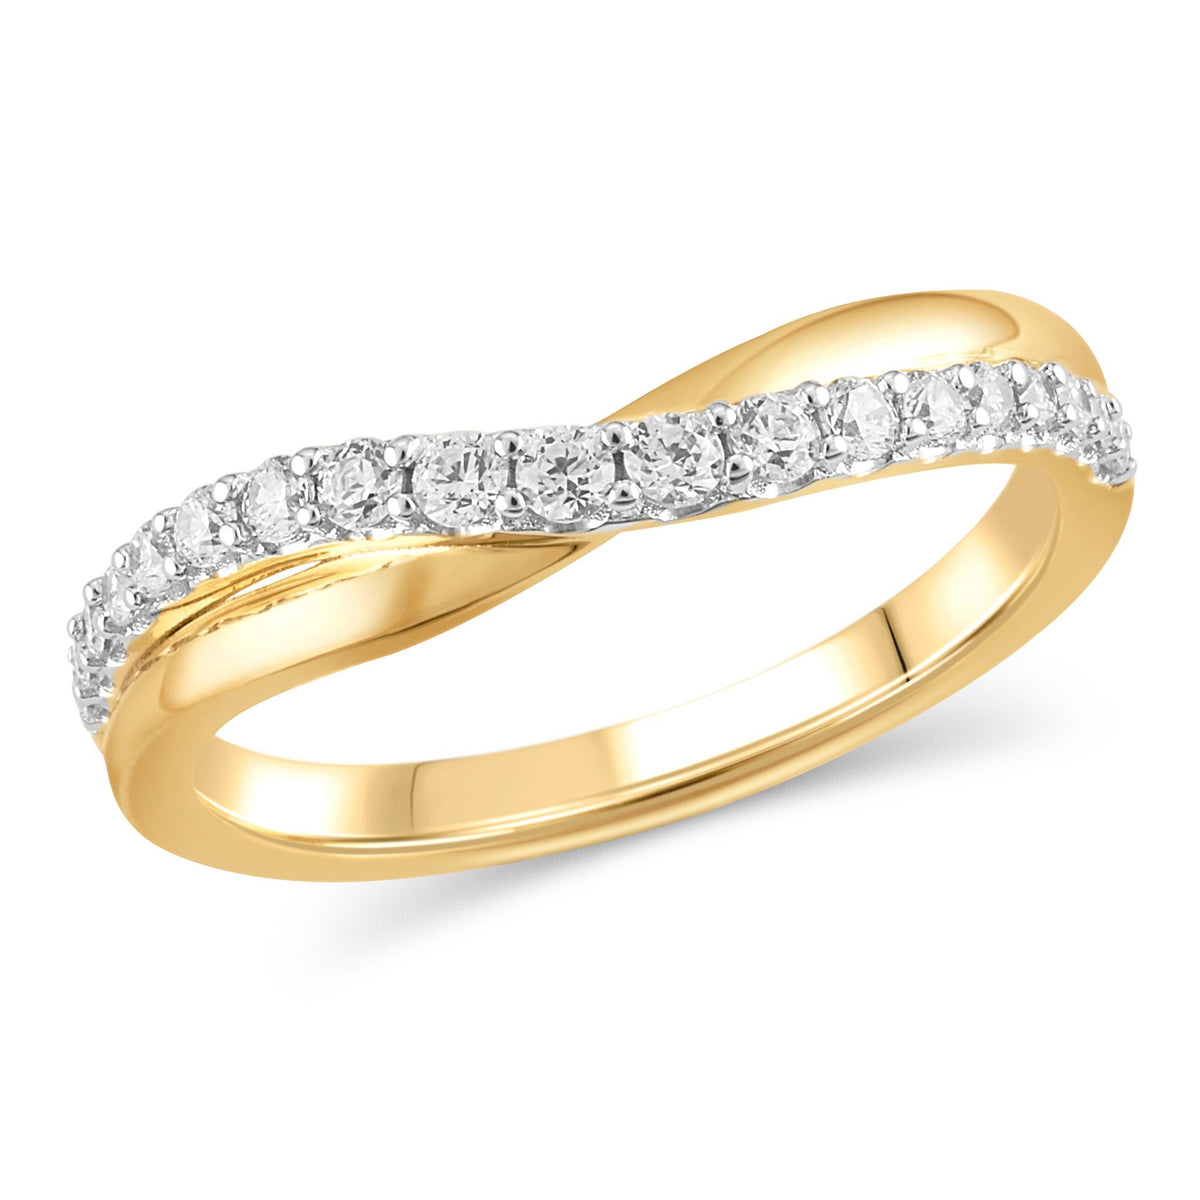 14Kt Yellow Gold Curved Wedding Ring With 0.33cttw Natural Diamonds